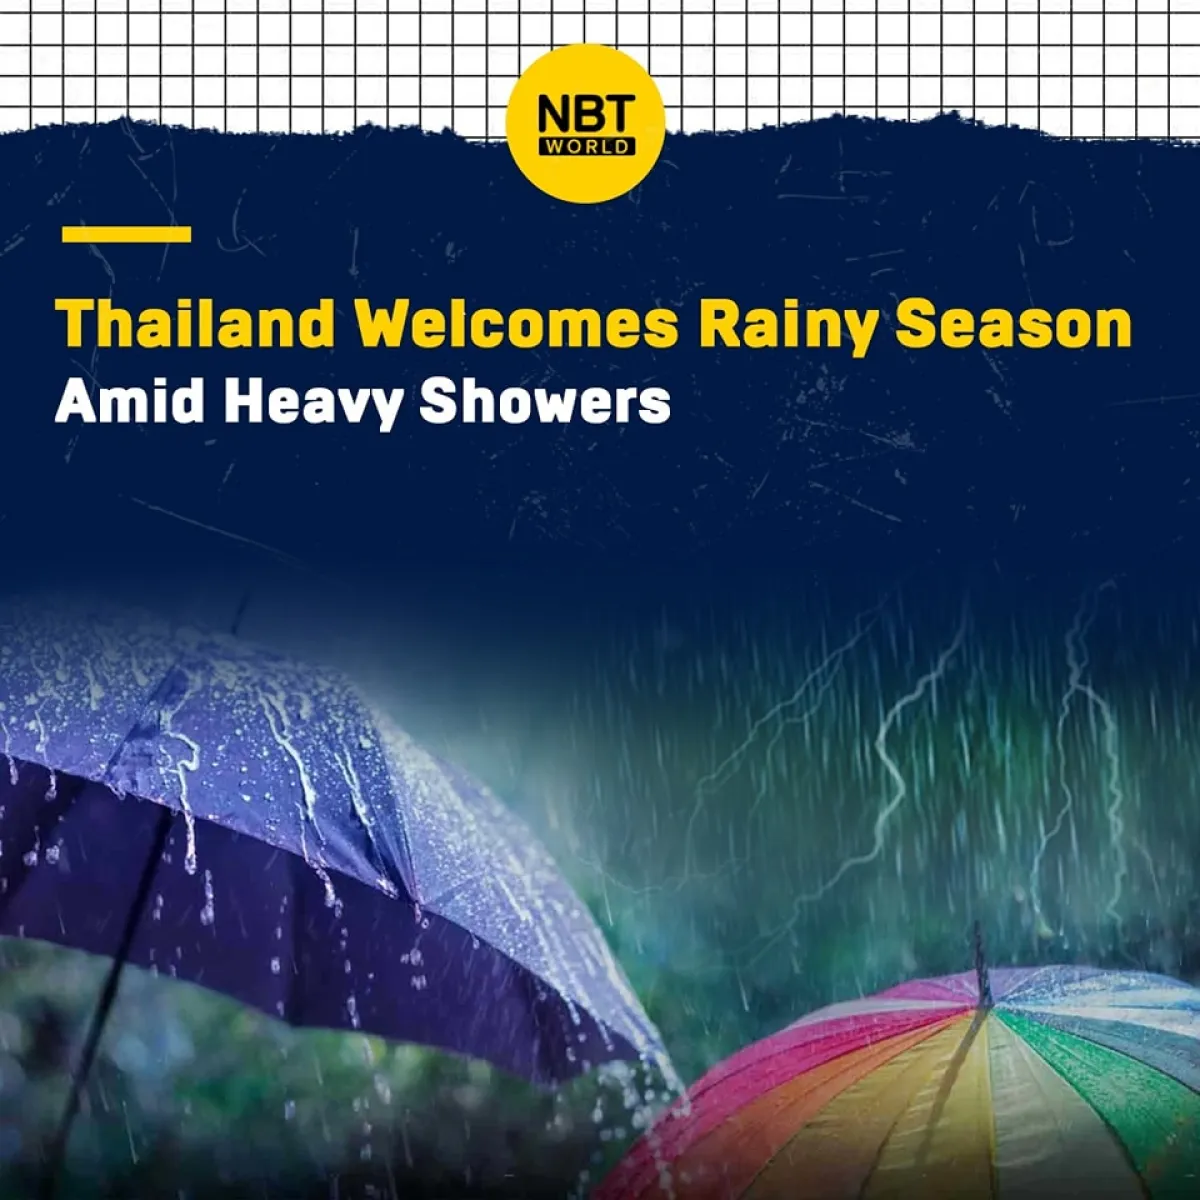 The Thai Meteorological Department (TMD) has officially announced the start of the rainy season following a series of downpours that have affected more than 60% of the country's upper regions over the past three days. This transition from summer, observed